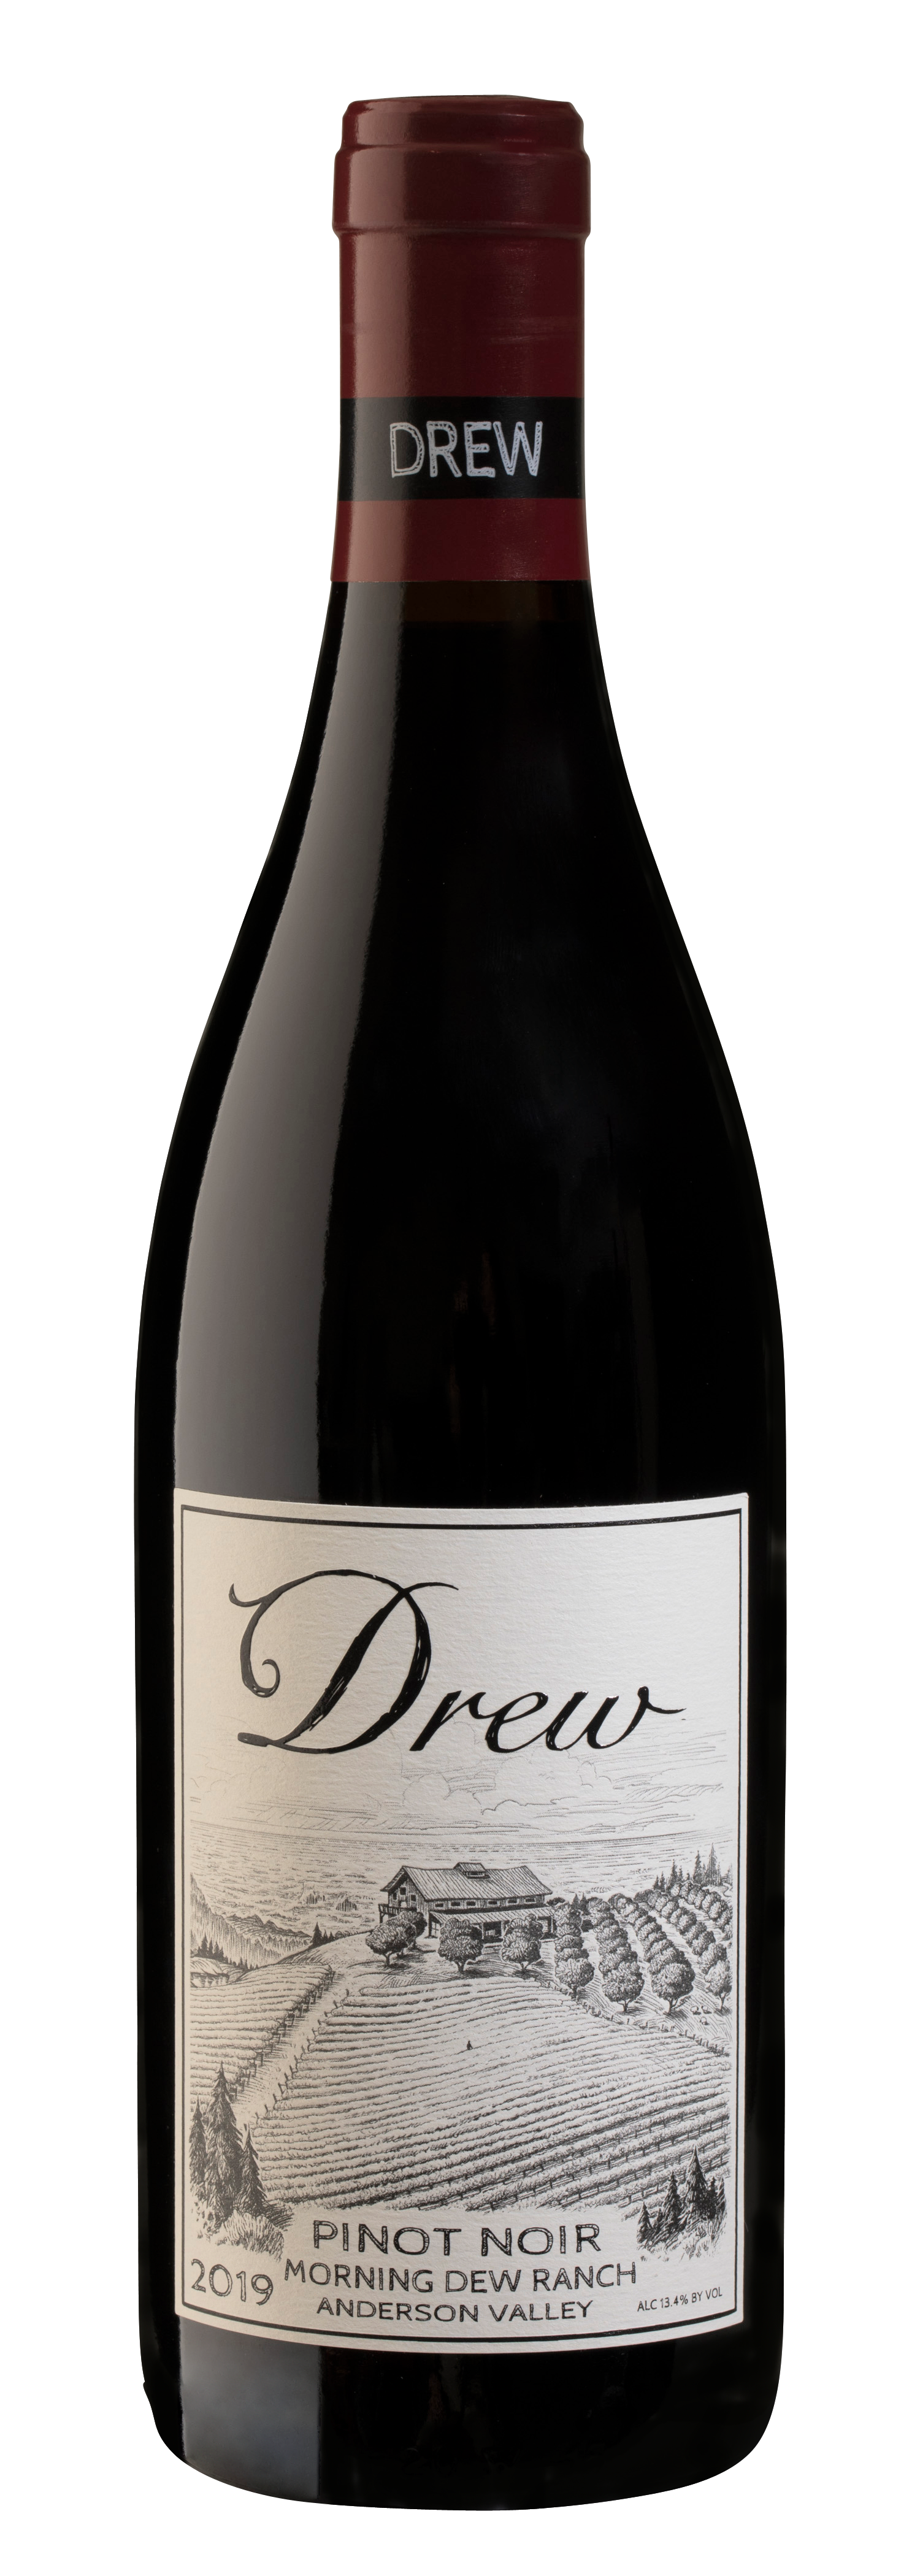 Product Image for 2019 Morning Dew Ranch Pinot Noir